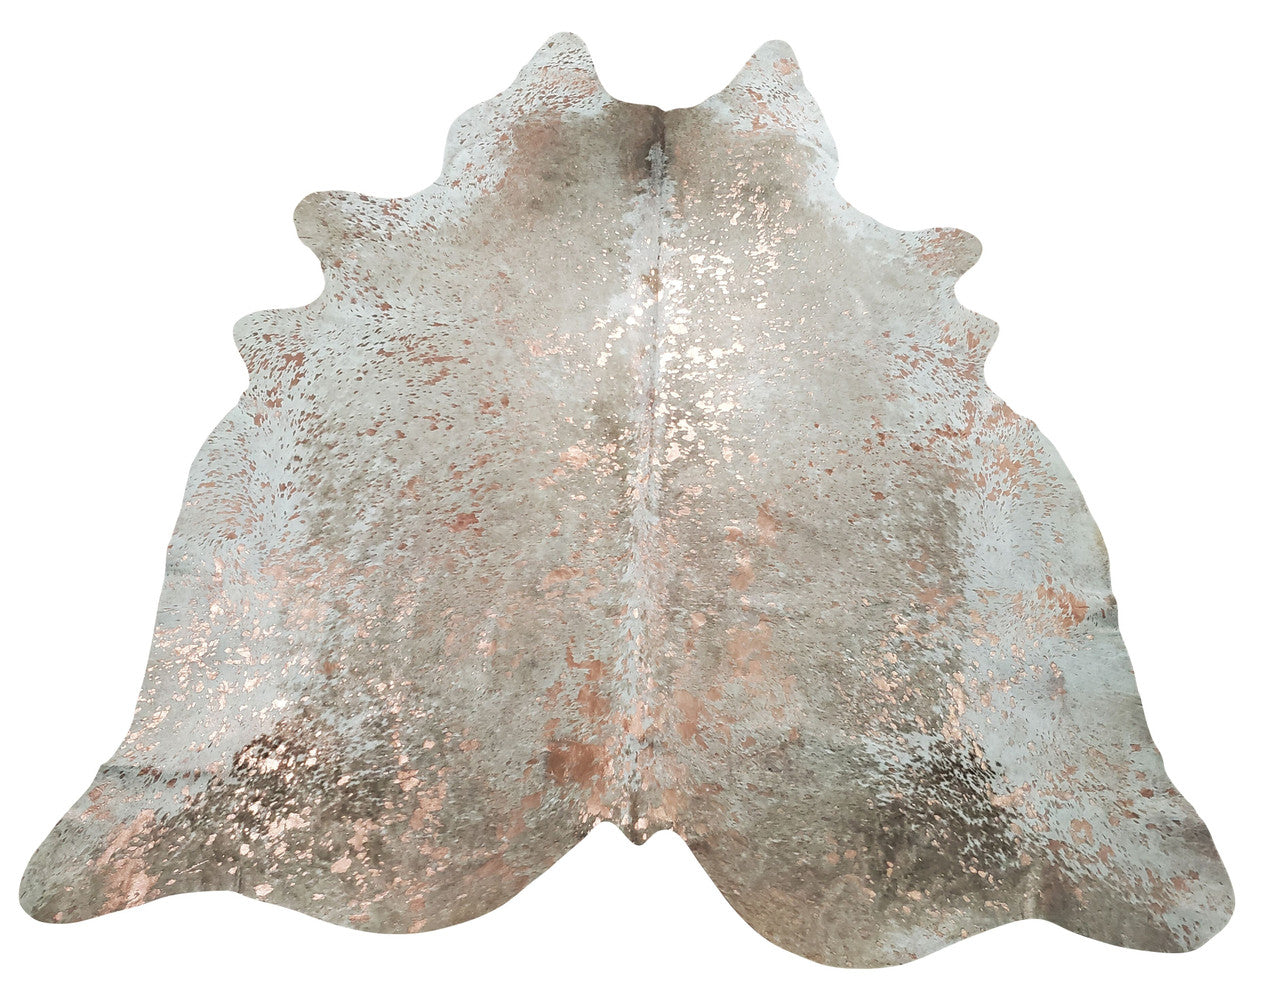 This metallic cowhide rug is absolutely lovely ! It is warm, soft, excellent quality and looks great in any home. 